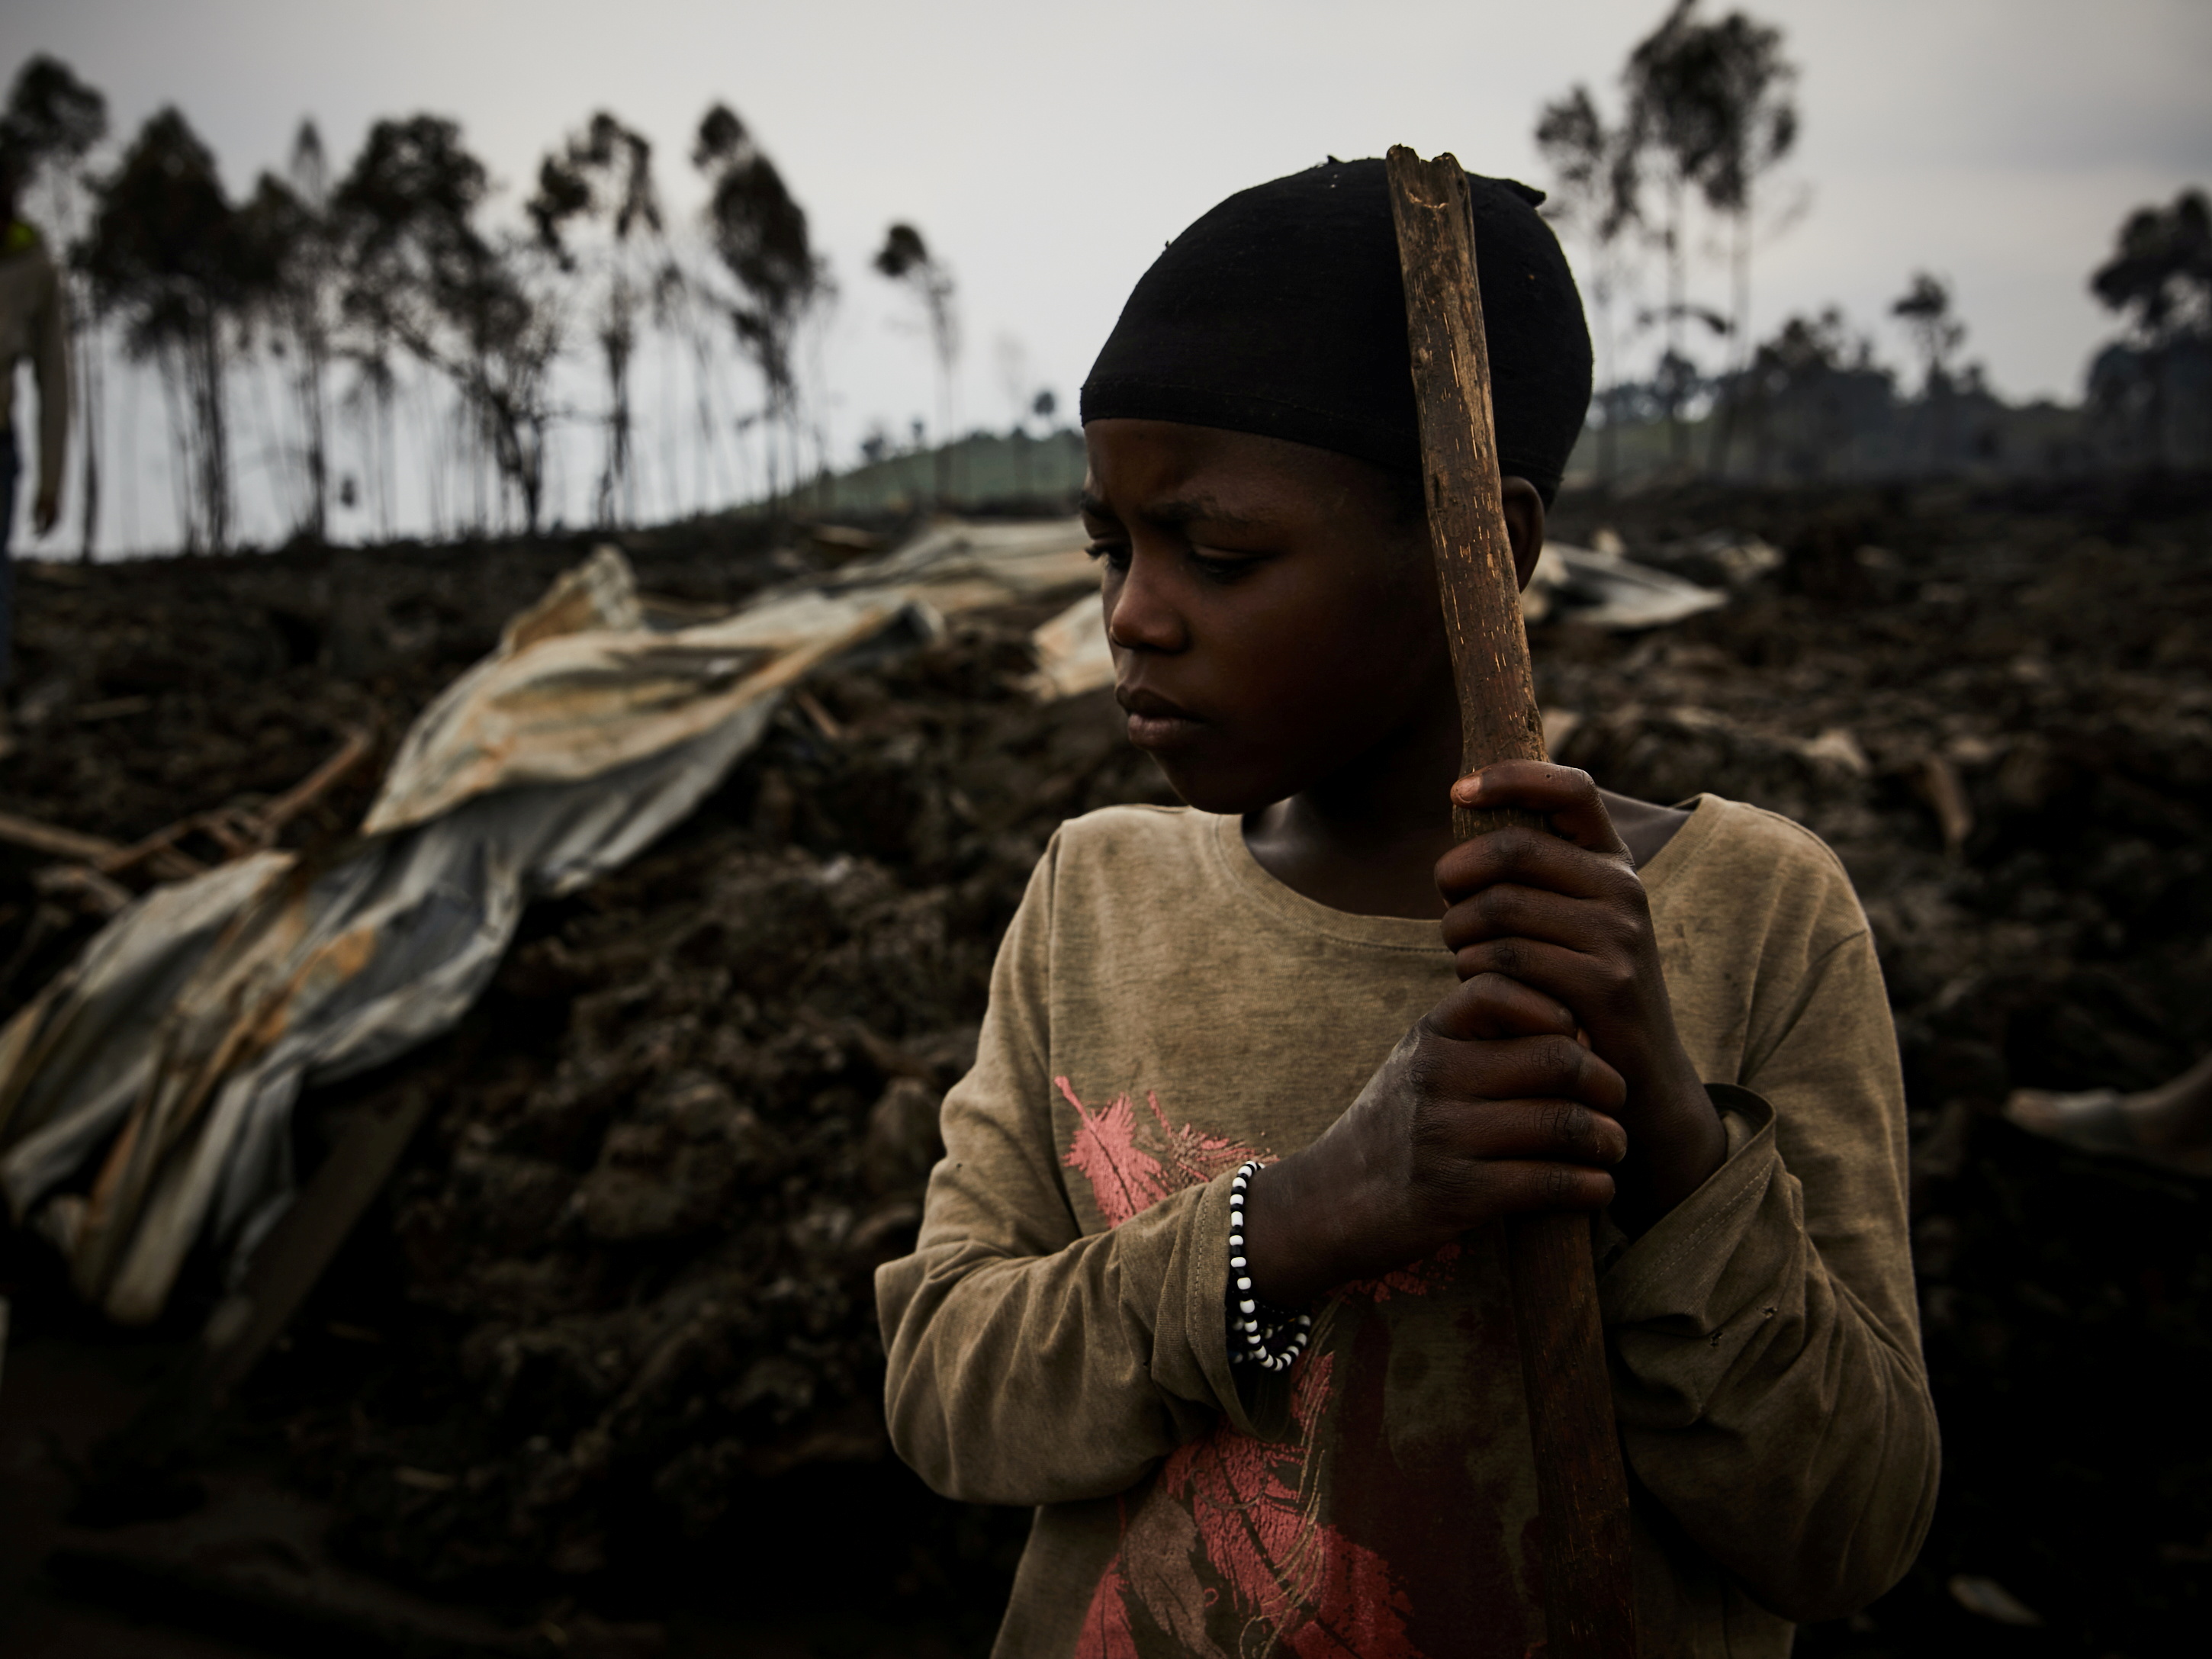 A Congolese child, Jolie, 11, prepares to evacuate from recurrent earth tremors as aftershocks after homes were covered with lava deposited by the eruption of Mount Nyiragongo near Goma